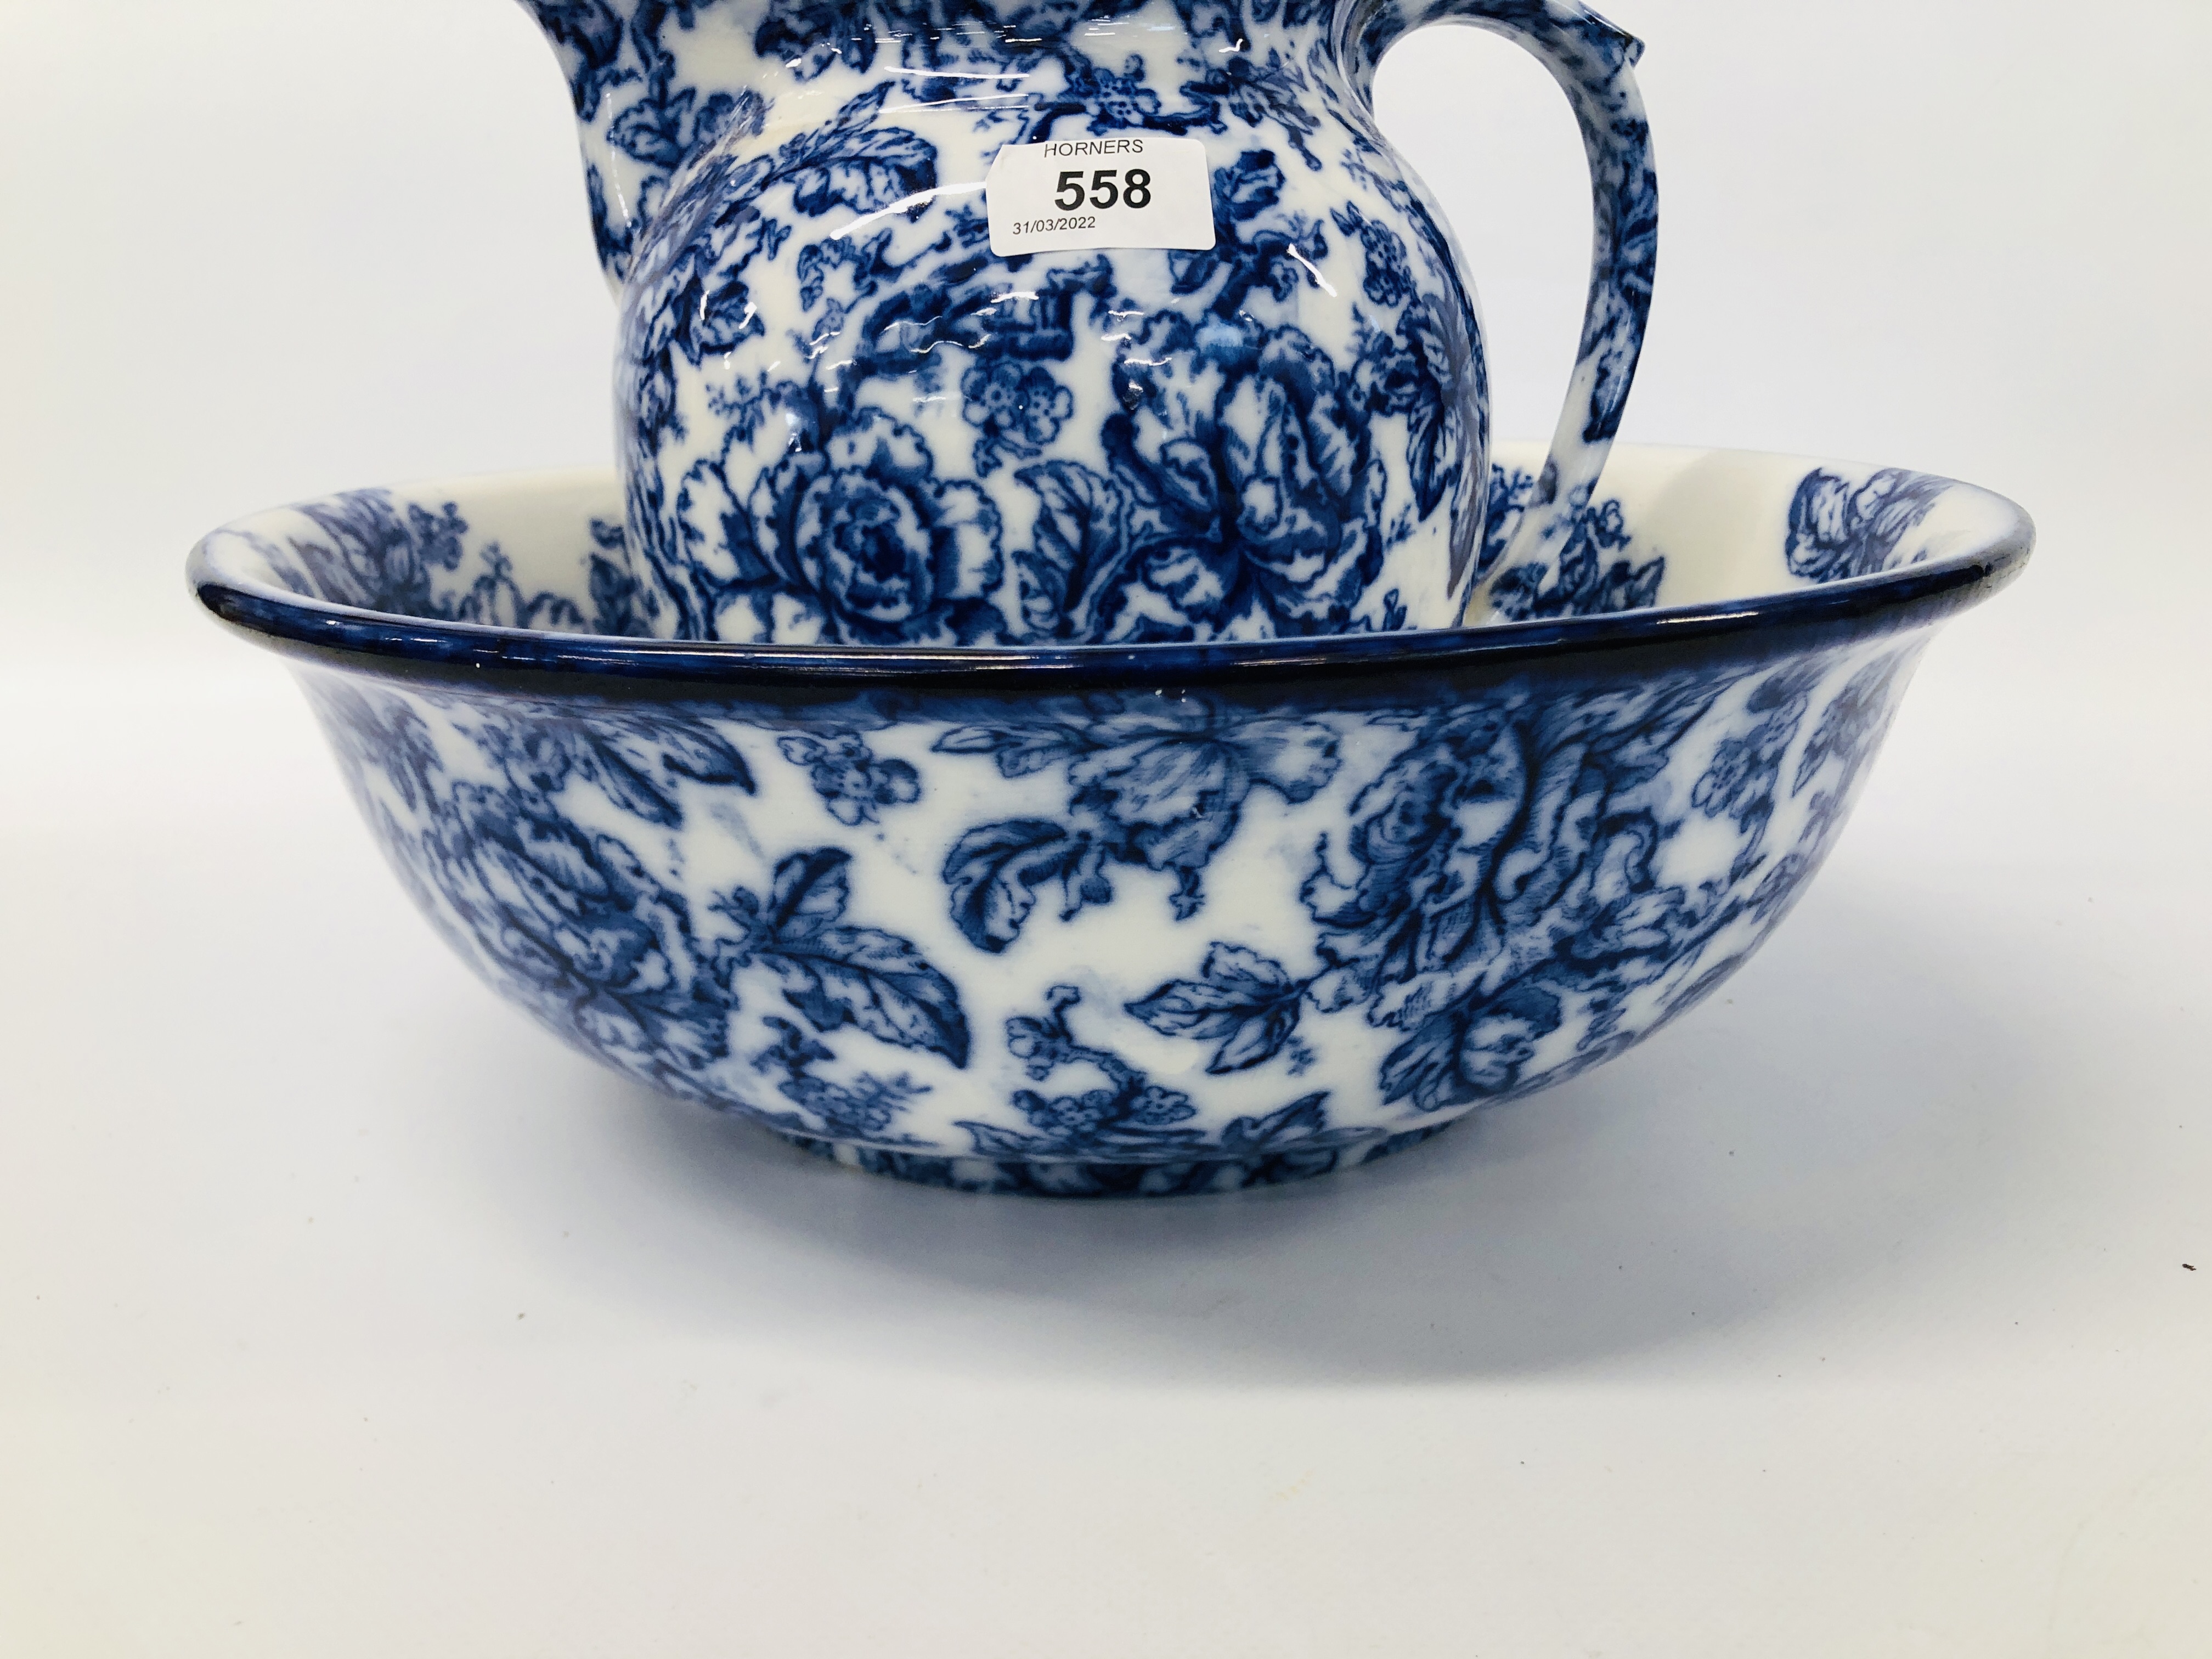 LOSOL WARE "CAVENDISH" BLUE AND WHITE ROSE DECORATED WASH JUG AND BOWL ALONG WITH A "BOOTHS" - Image 8 of 11